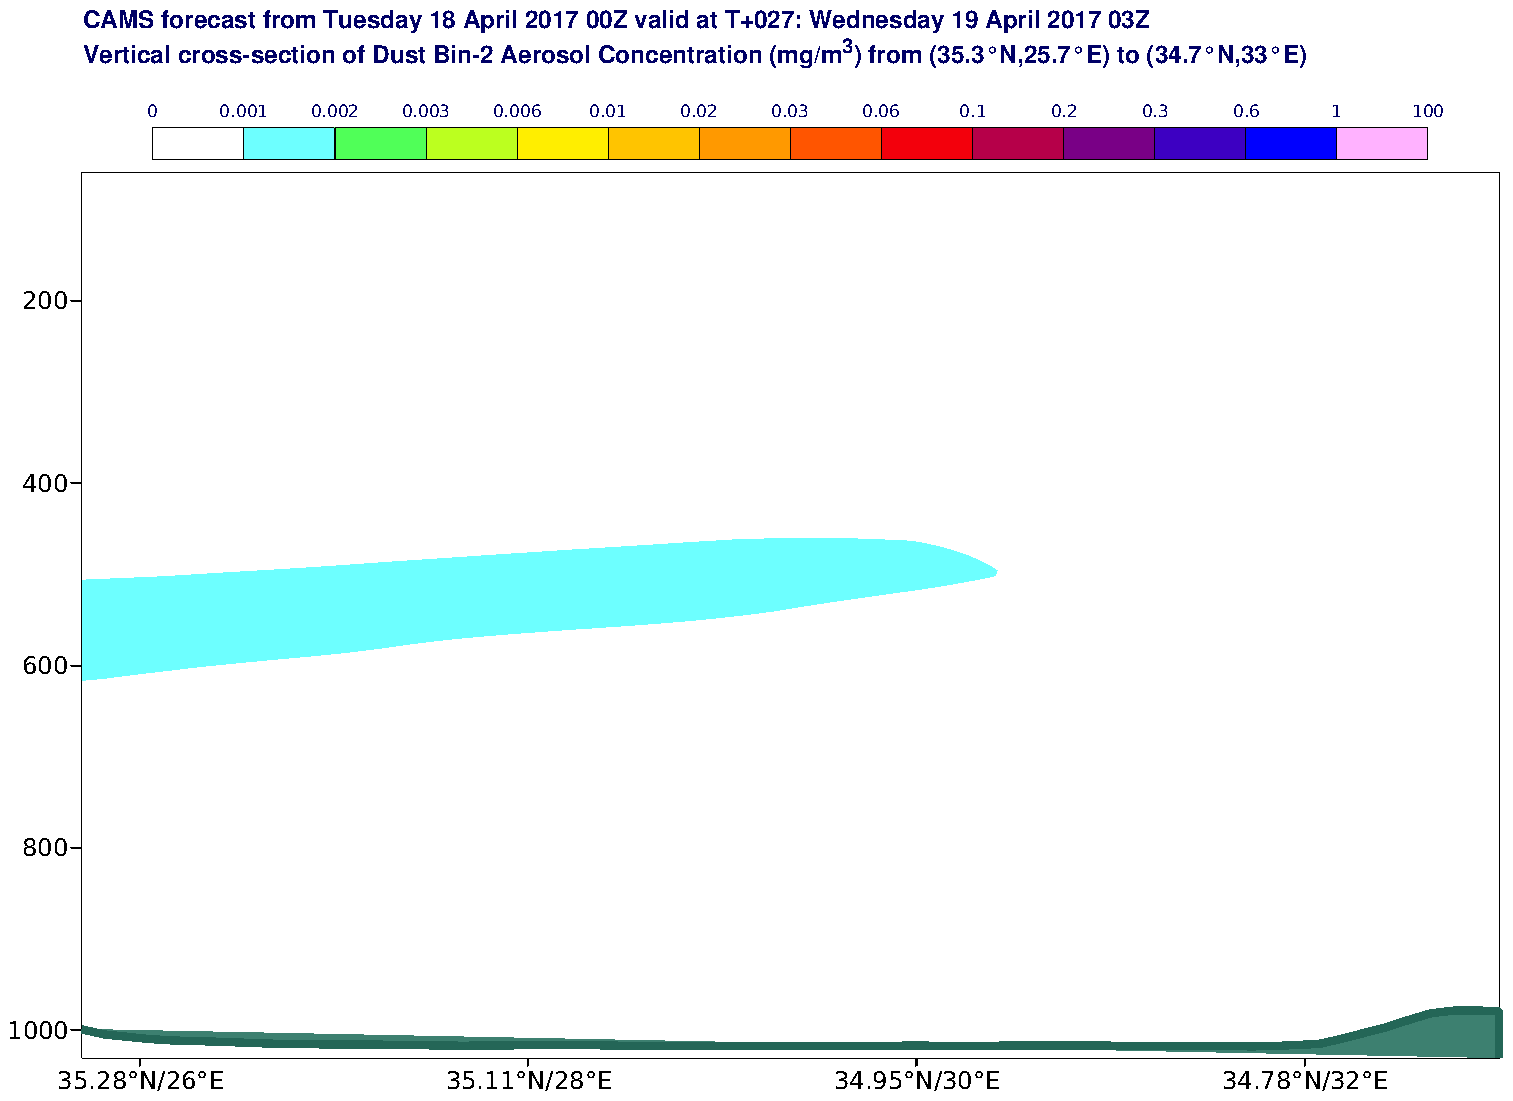 Vertical cross-section of Dust Bin-2 Aerosol Concentration (mg/m3) valid at T27 - 2017-04-19 03:00